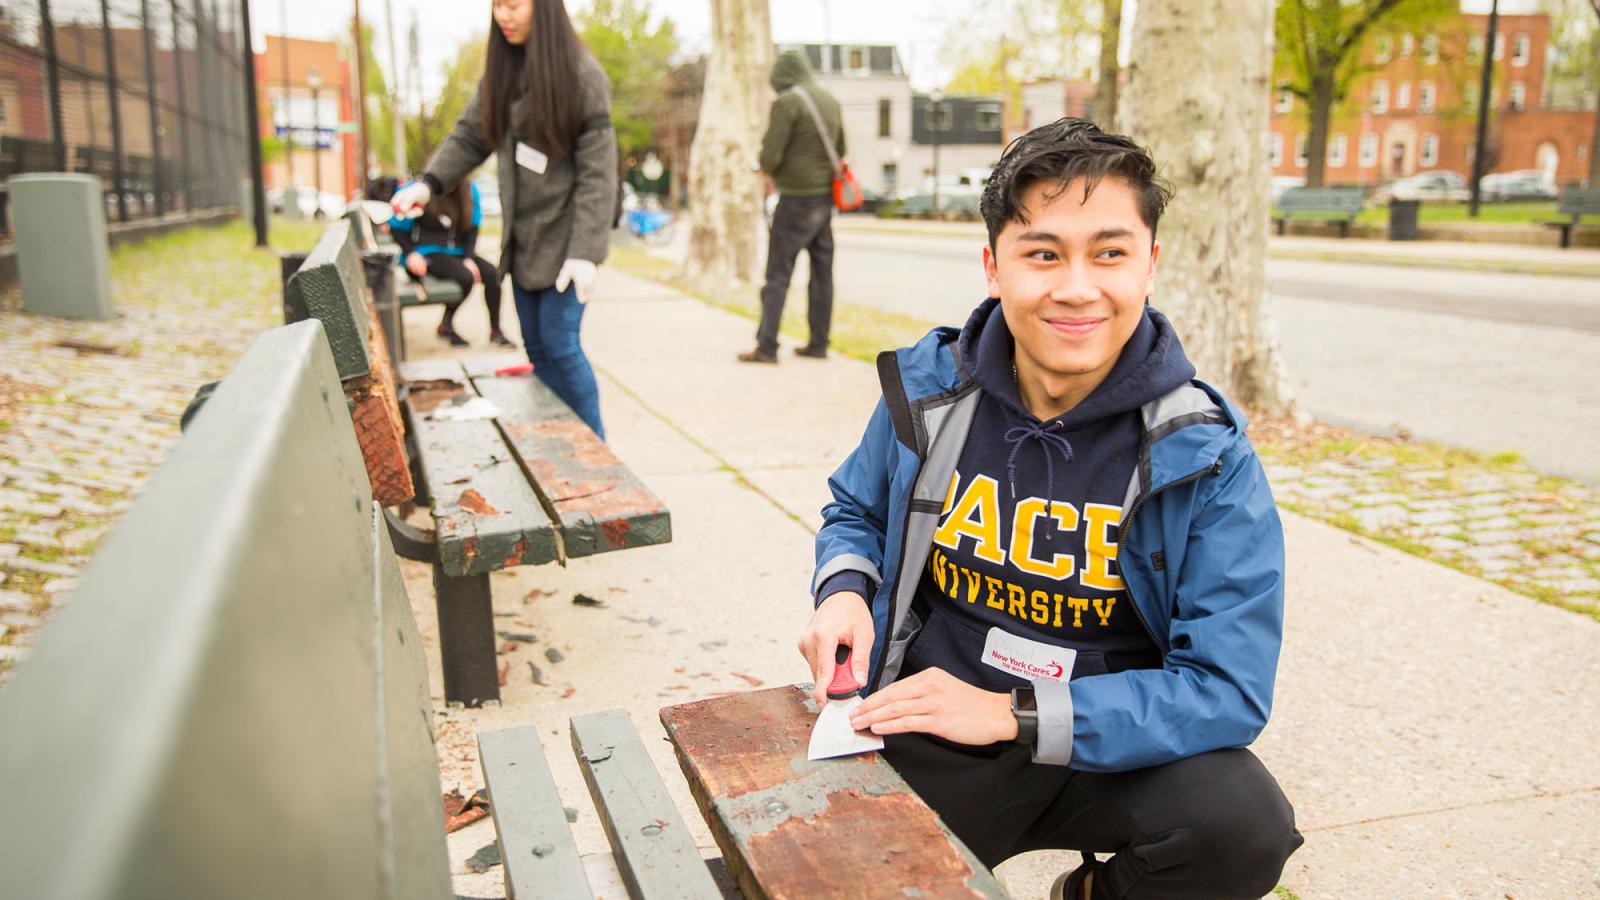 A smiling Pace student volunteering in a park scrapes old paint off a bench